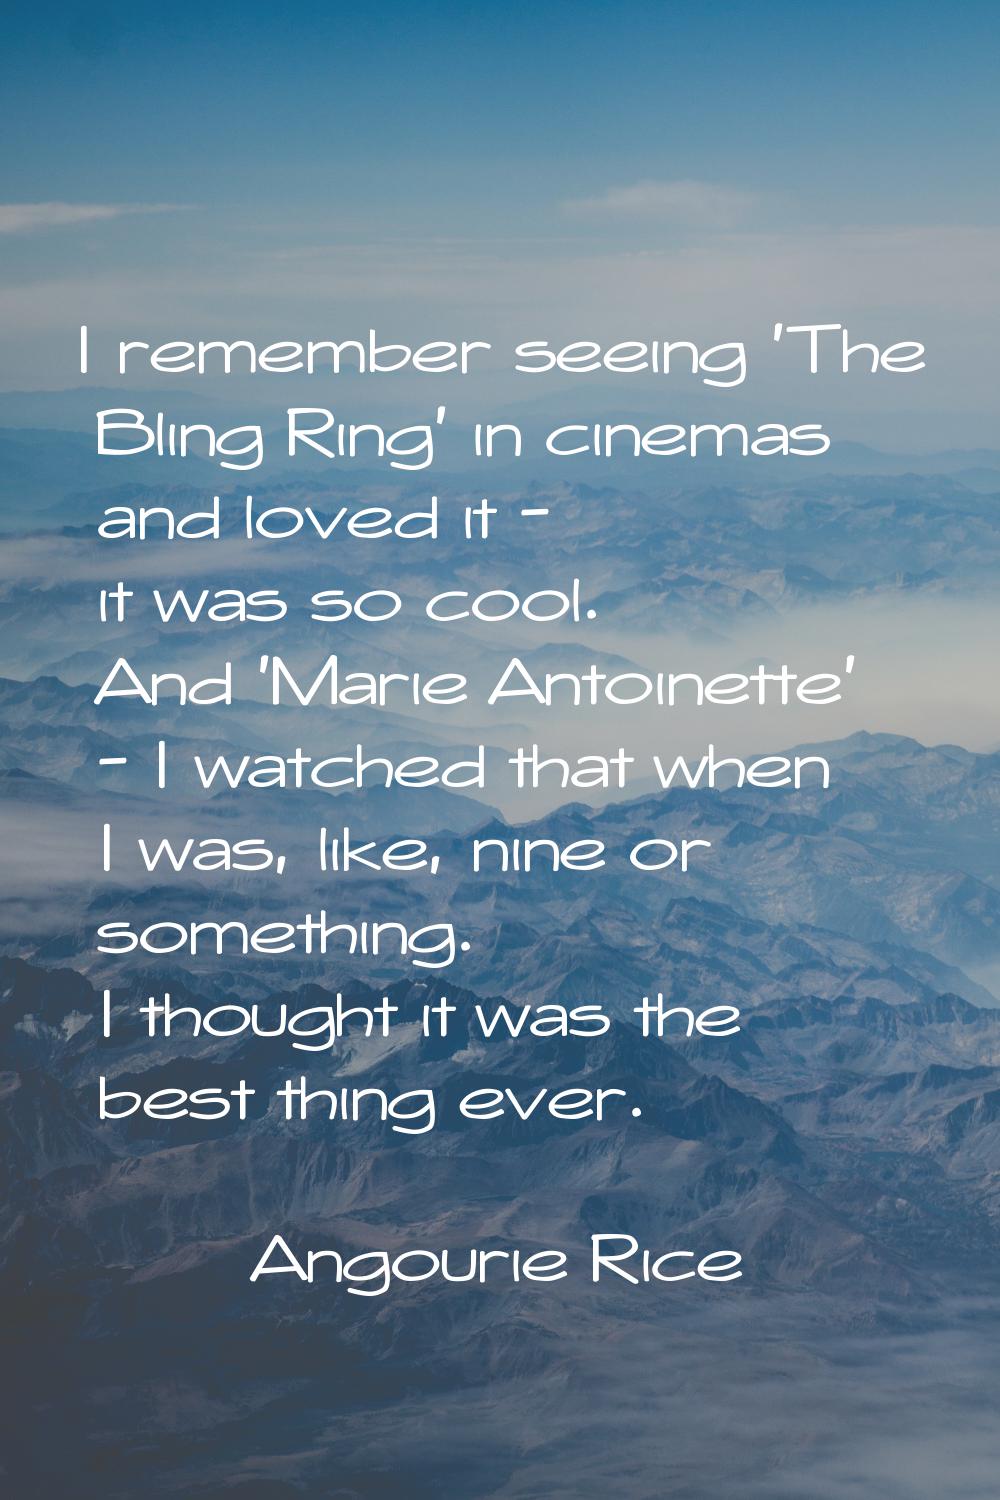 I remember seeing 'The Bling Ring' in cinemas and loved it - it was so cool. And 'Marie Antoinette'